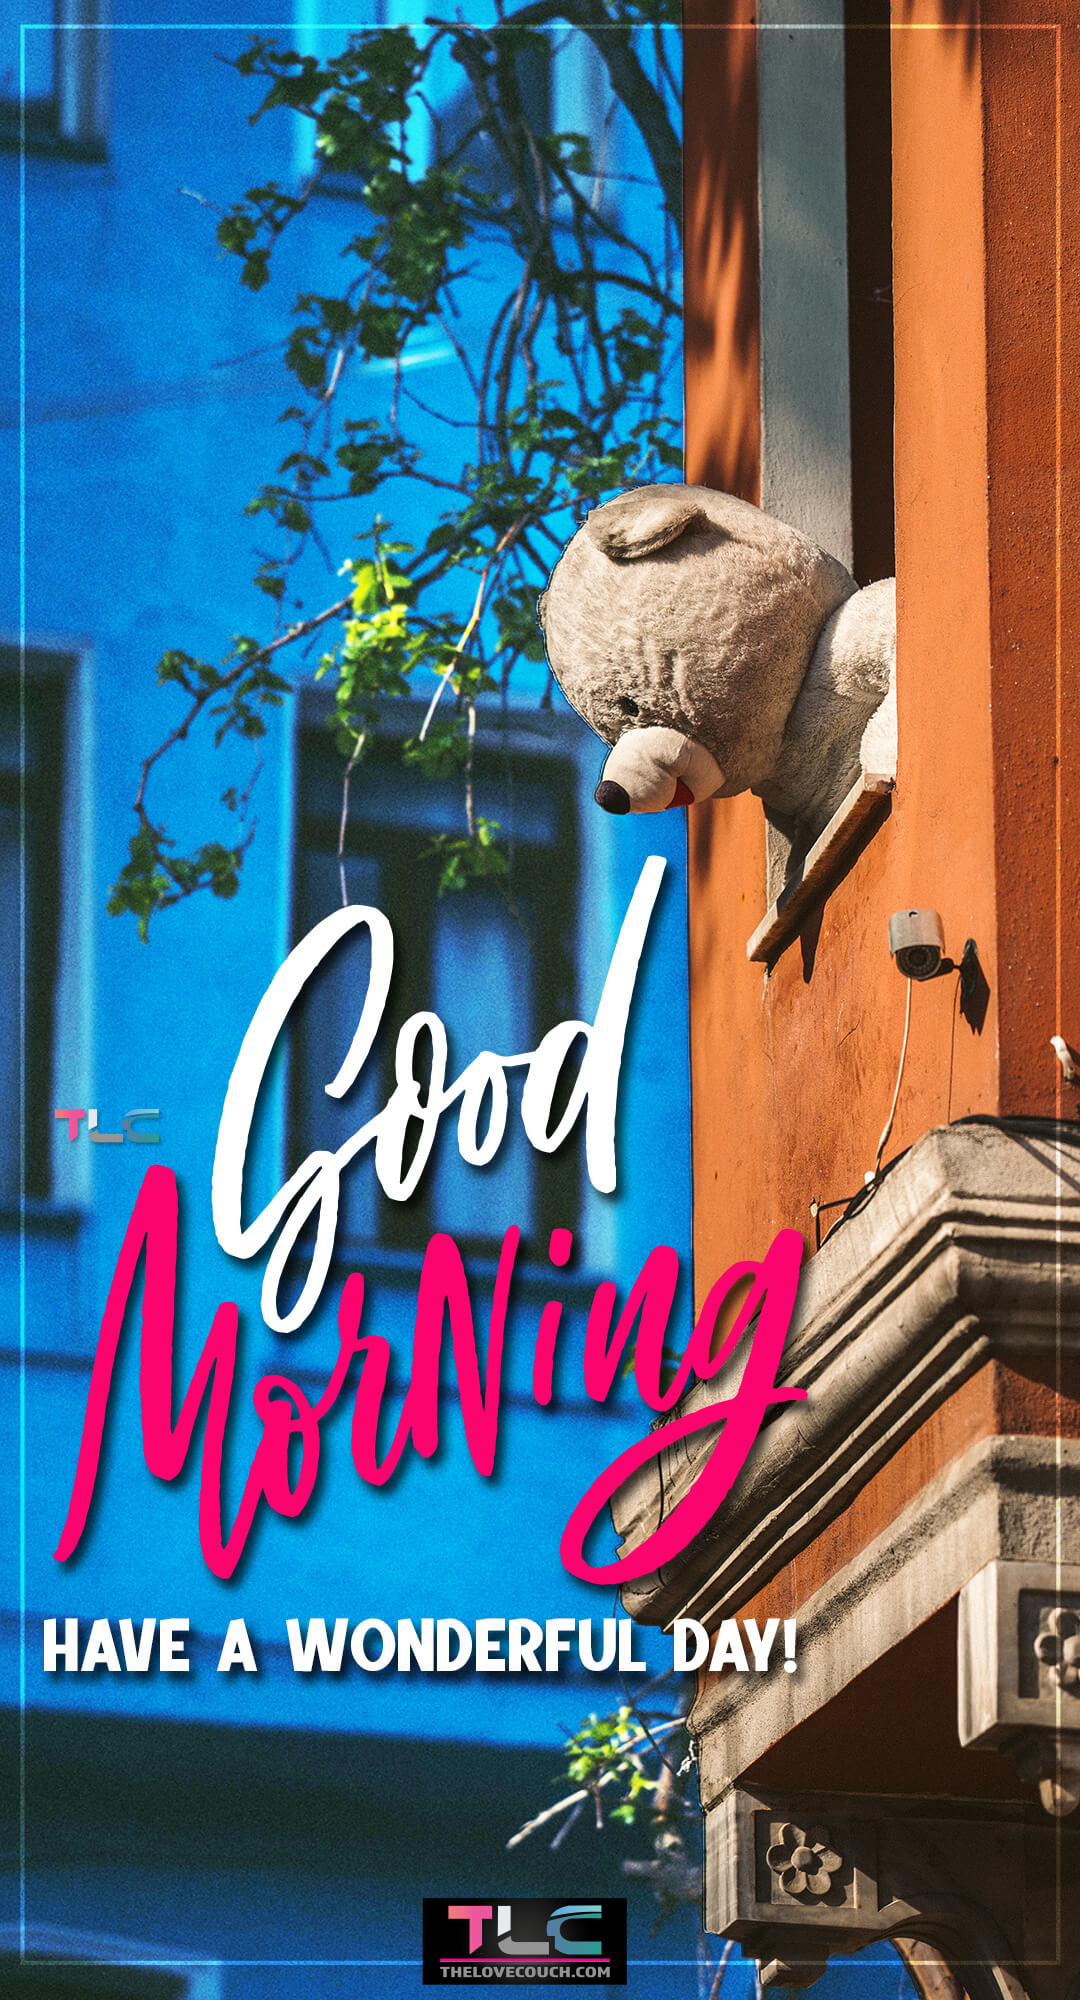 Good Morning Images HD - Teddy bear peeking out of the window - Have a wonderful day